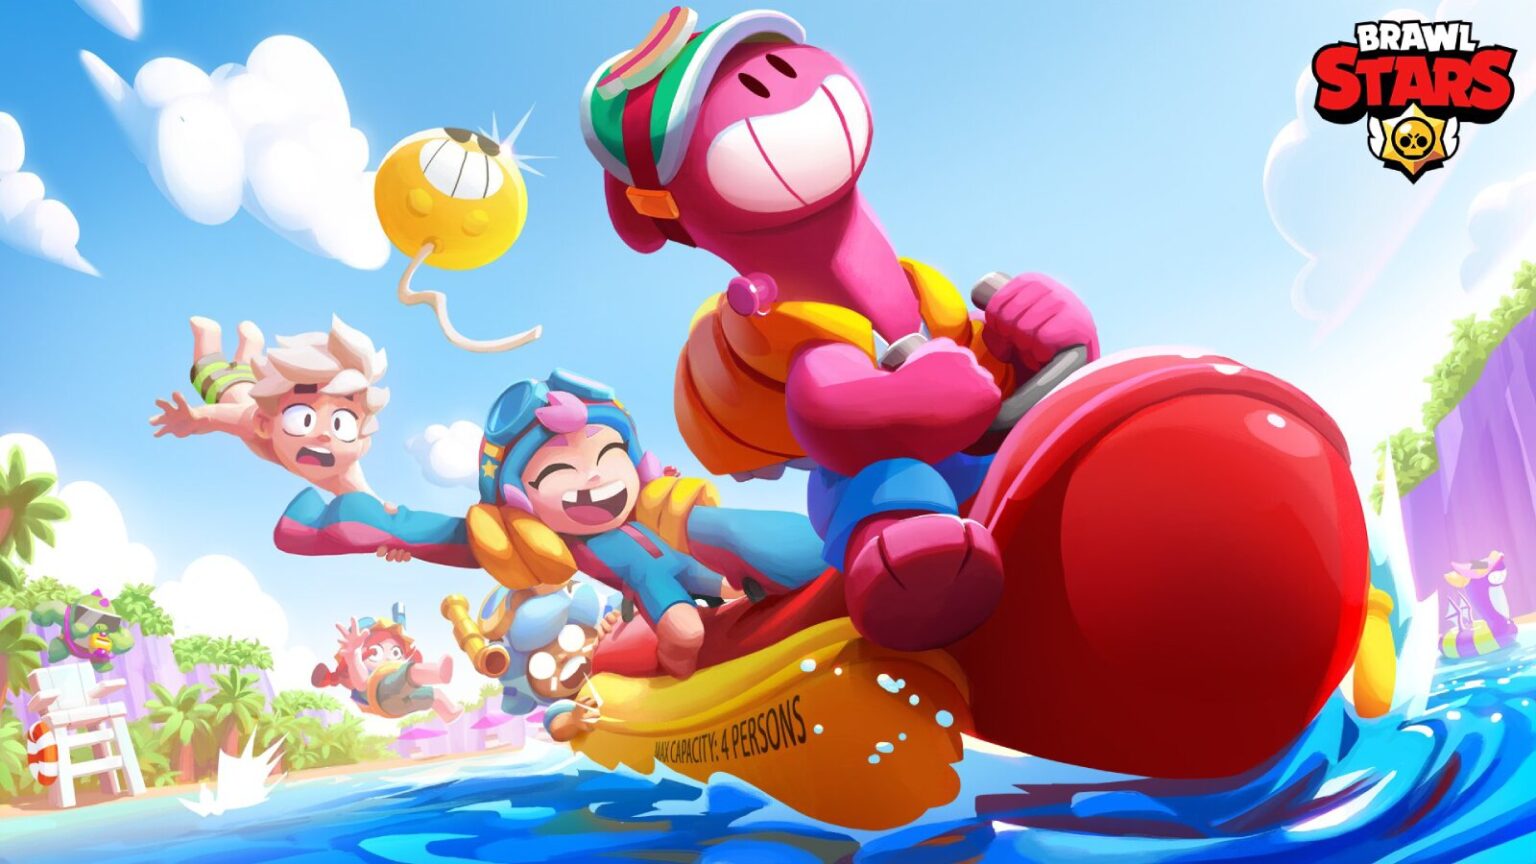 Brawl Stars Multiplayer Game Image Showing Two Characters Riding A Boat